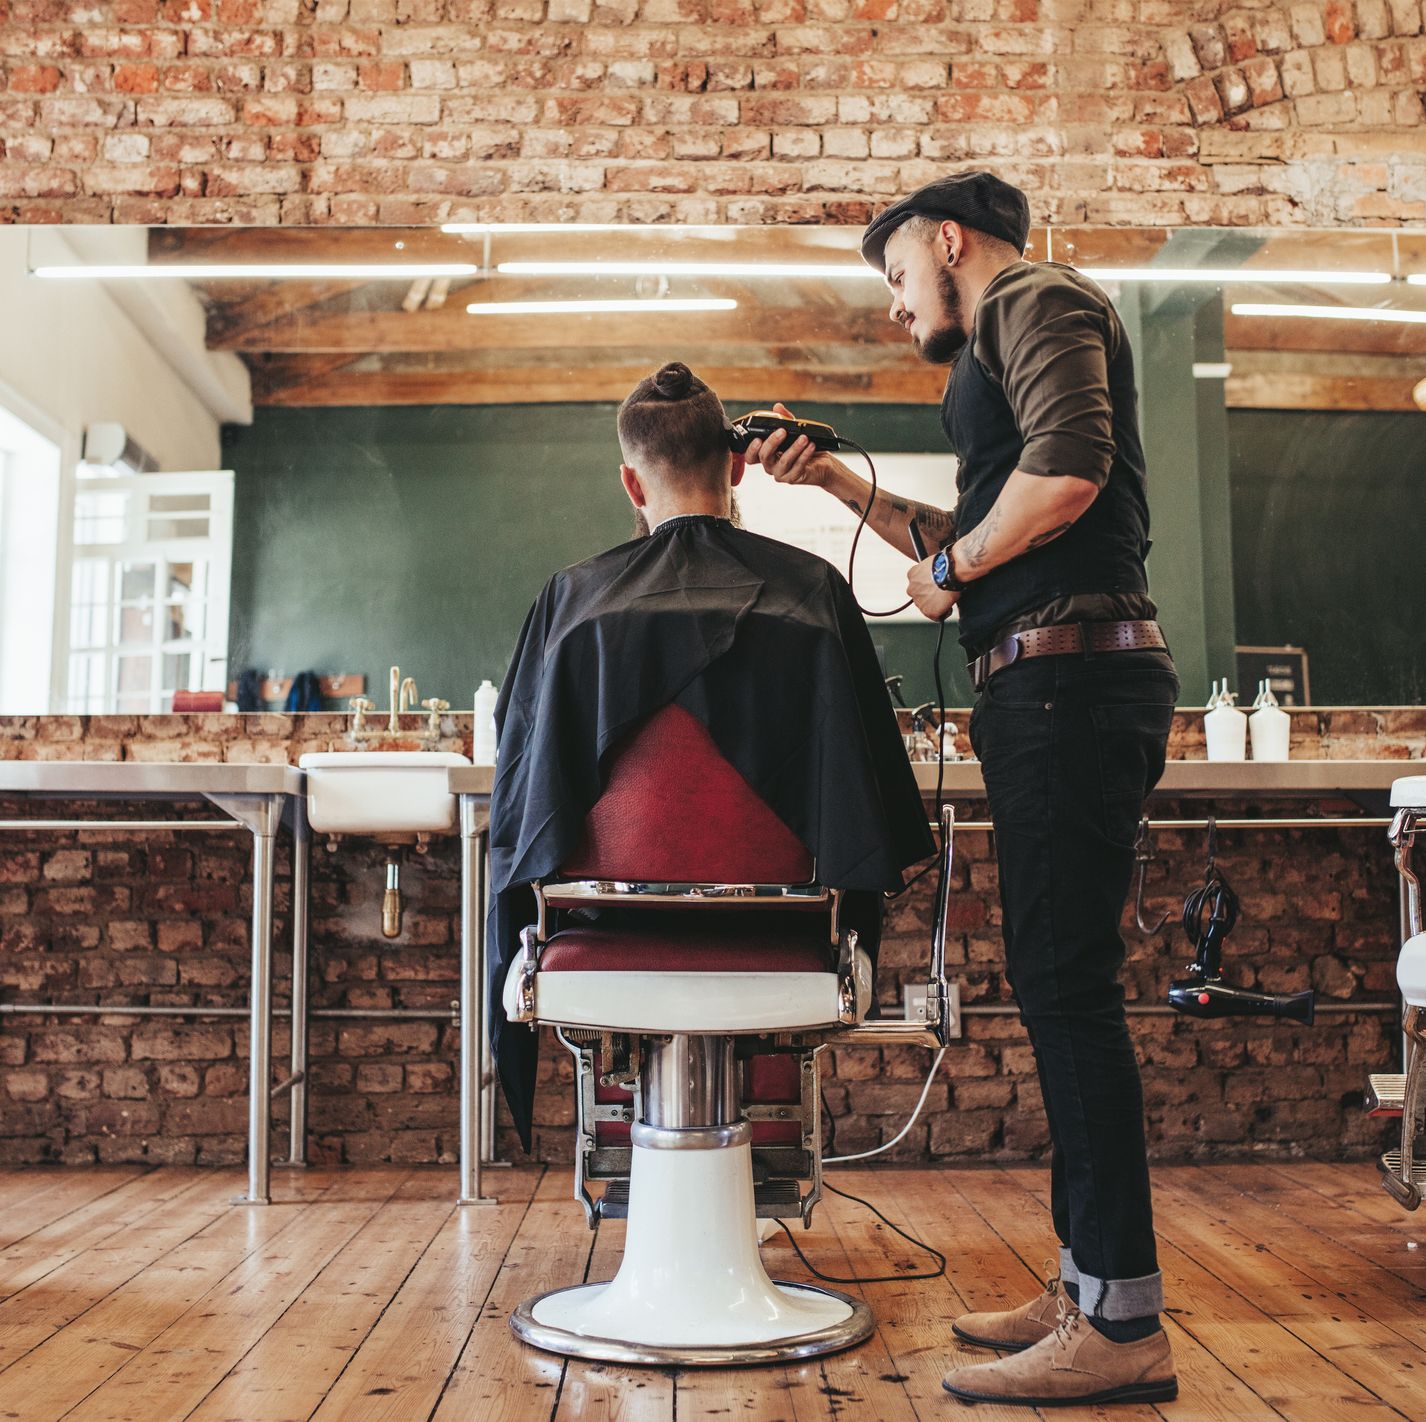 The Best Men's Haircut for Your Face Shape, According to Experts